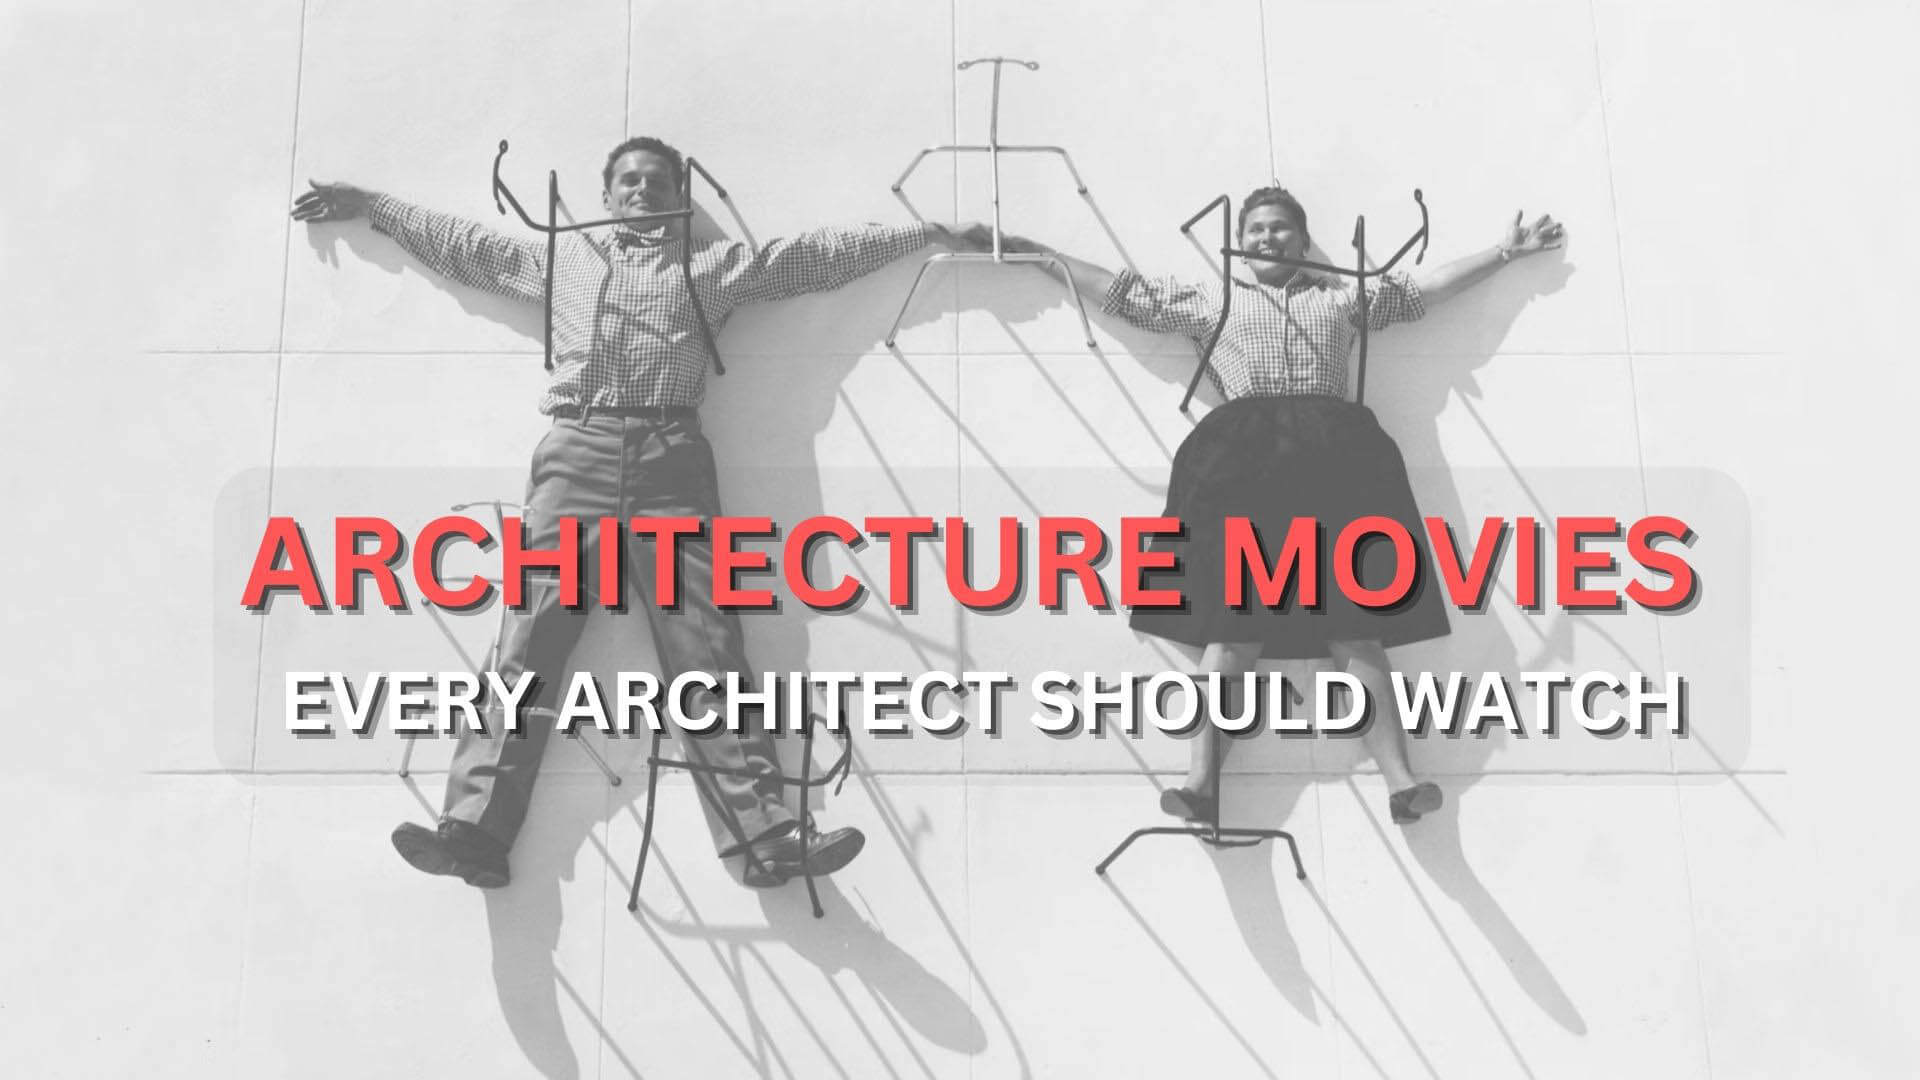 6 Movies That Use Architectural Visualizations to Tell Stories and